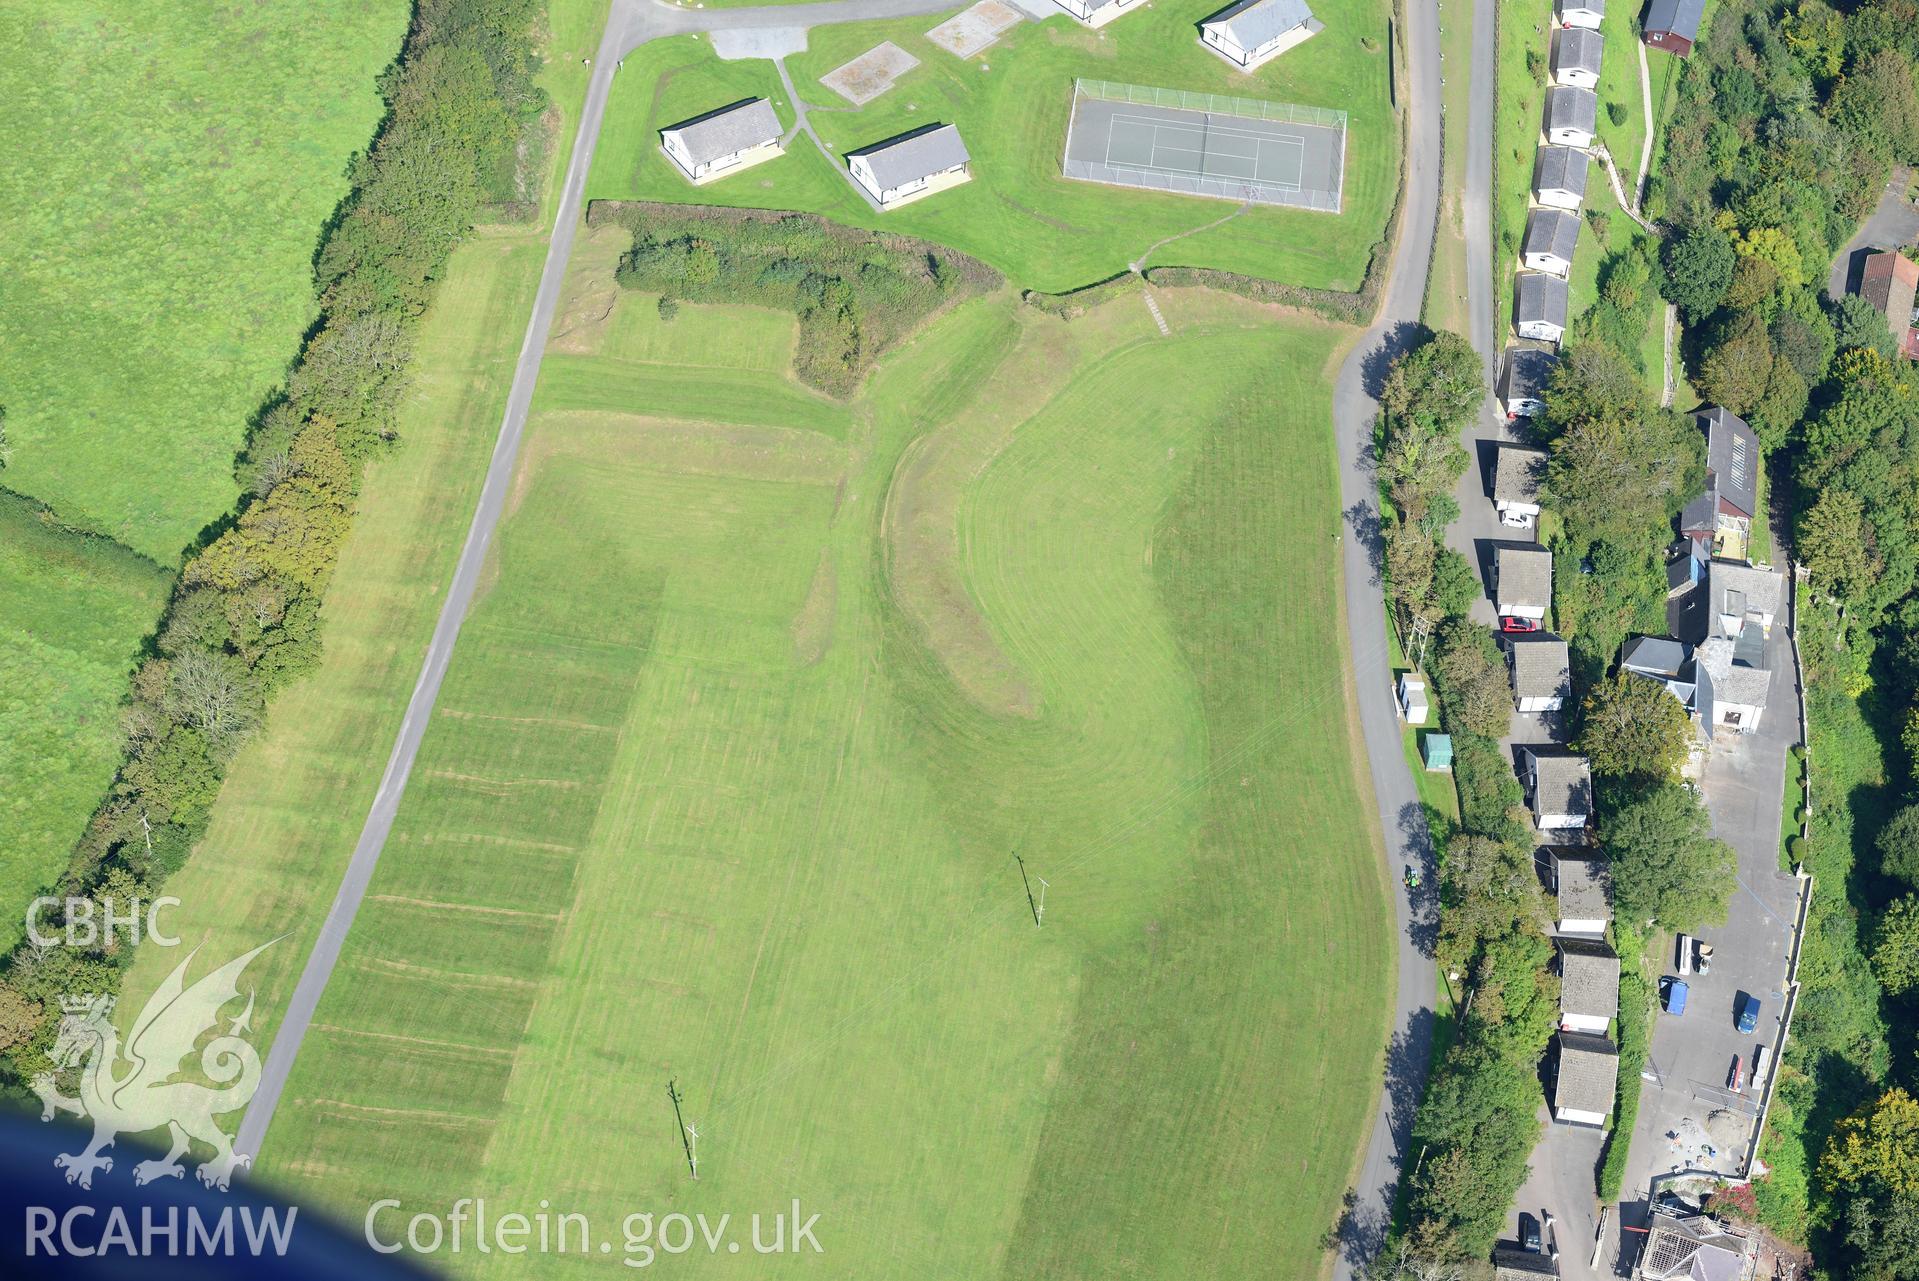 Glan-y-Mor fort, Laugharne. Oblique aerial photograph taken during the Royal Commission's programme of archaeological aerial reconnaissance by Toby Driver on 30th September 2015.